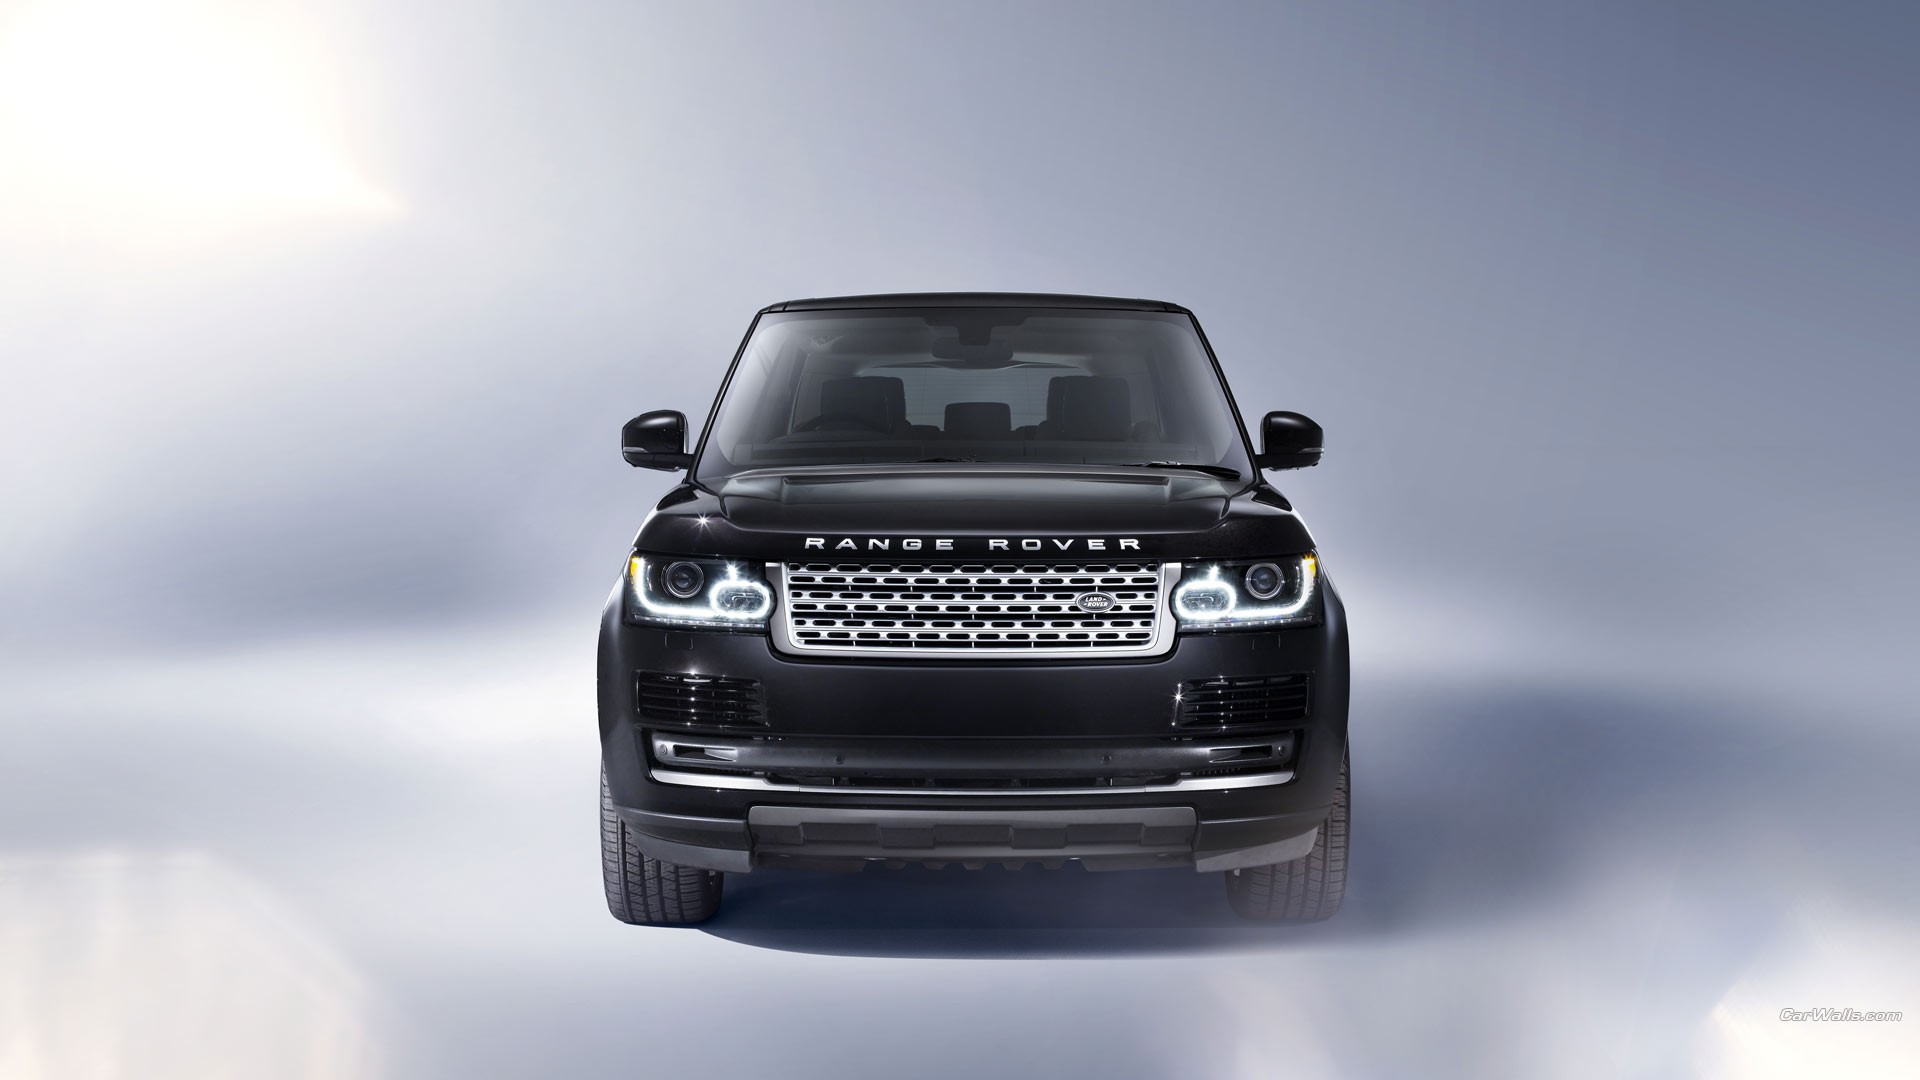 General 1920x1080 Range Rover car frontal view vehicle black cars Land Rover watermarked British cars SUV